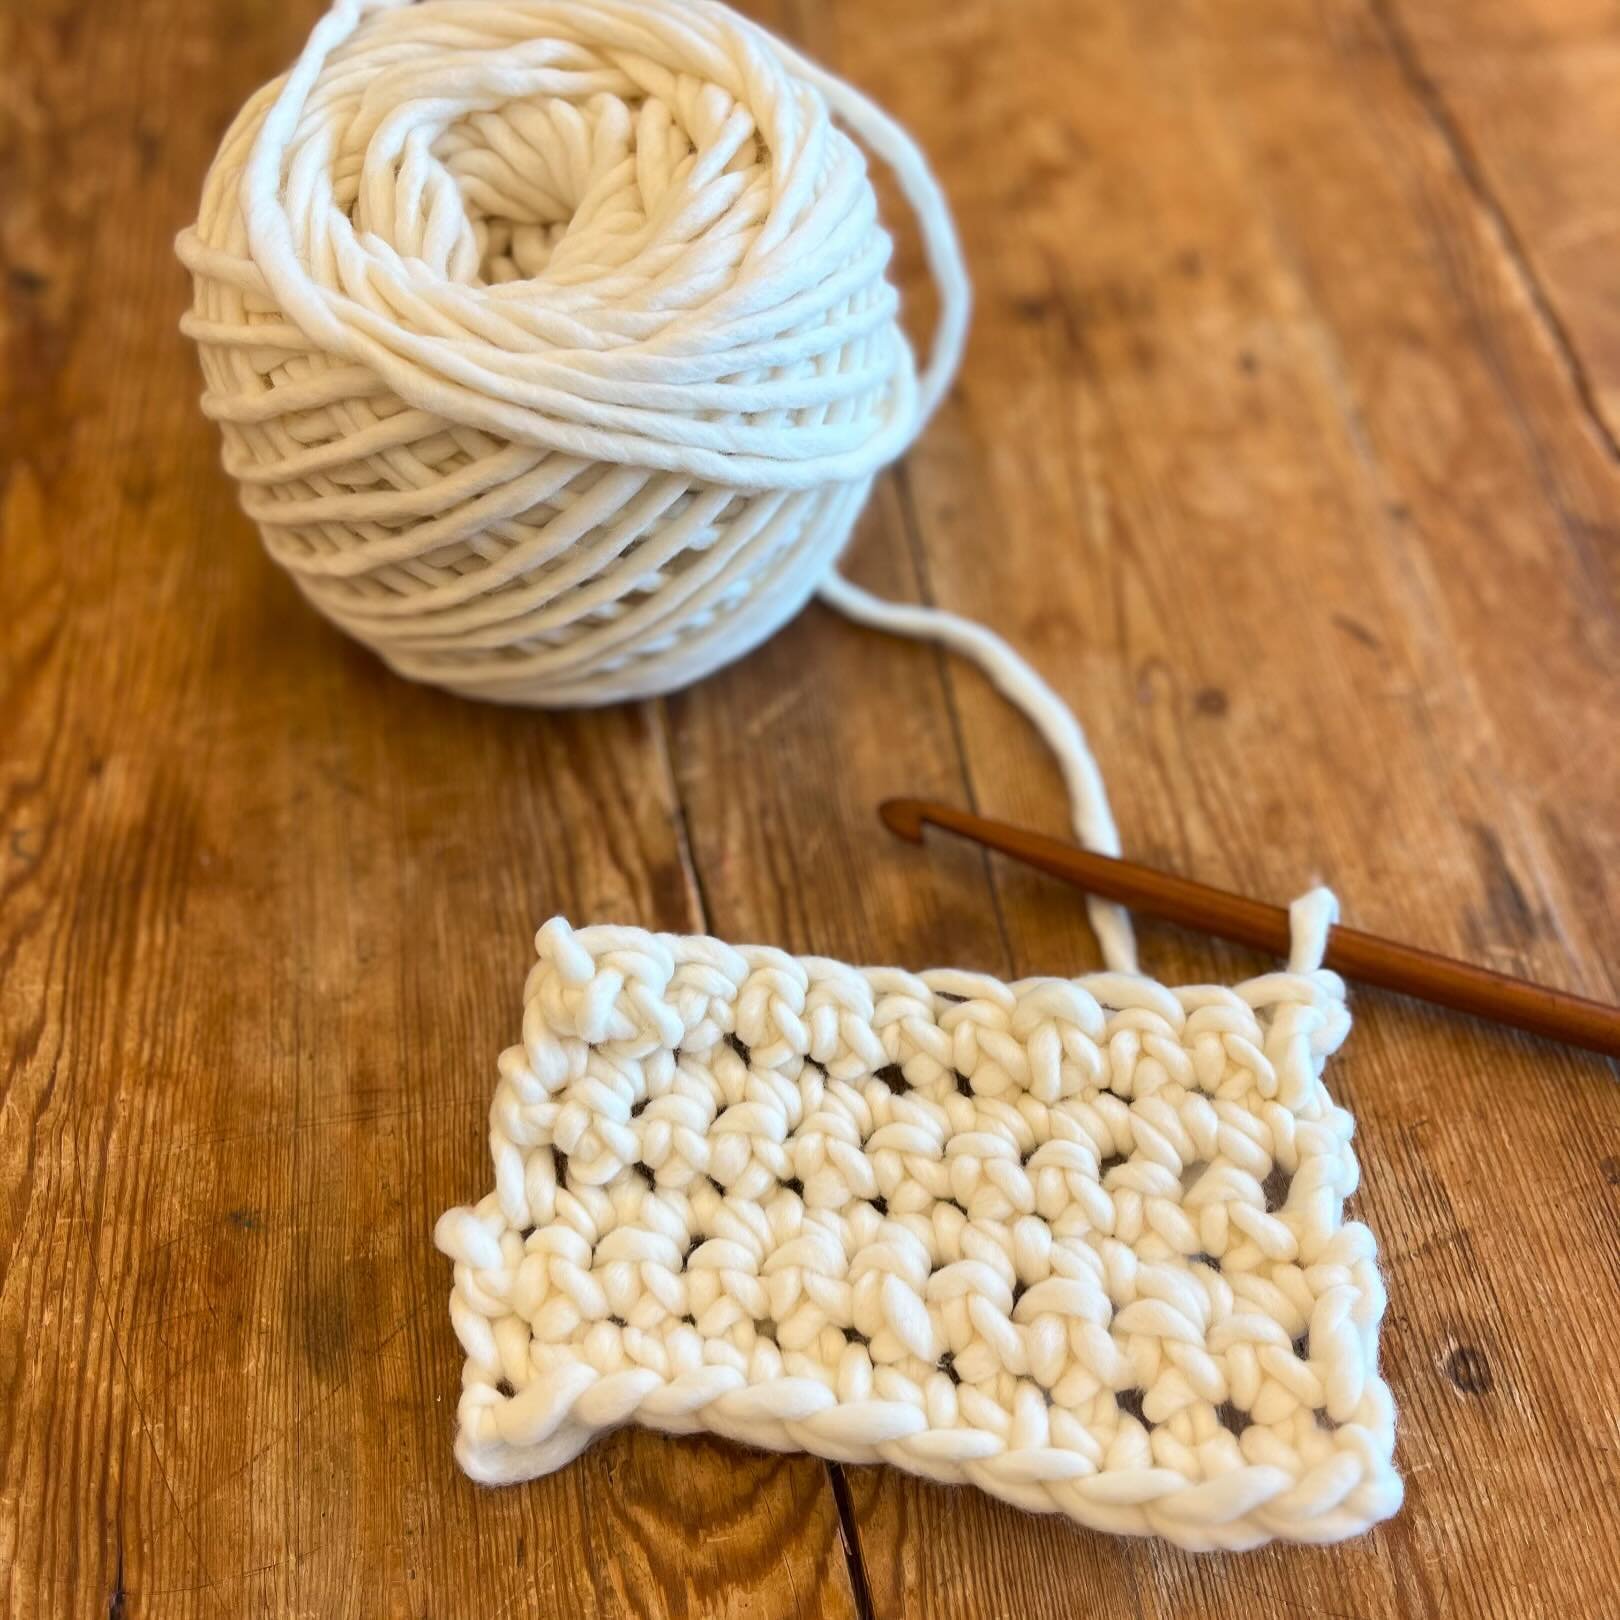 Happy Crochet May! We&rsquo;re excited for our first learn to crochet class tonight! This evenings class is sold out, but there are still 3 spots left in our Saturday class! #crochetmay #learntocrochet